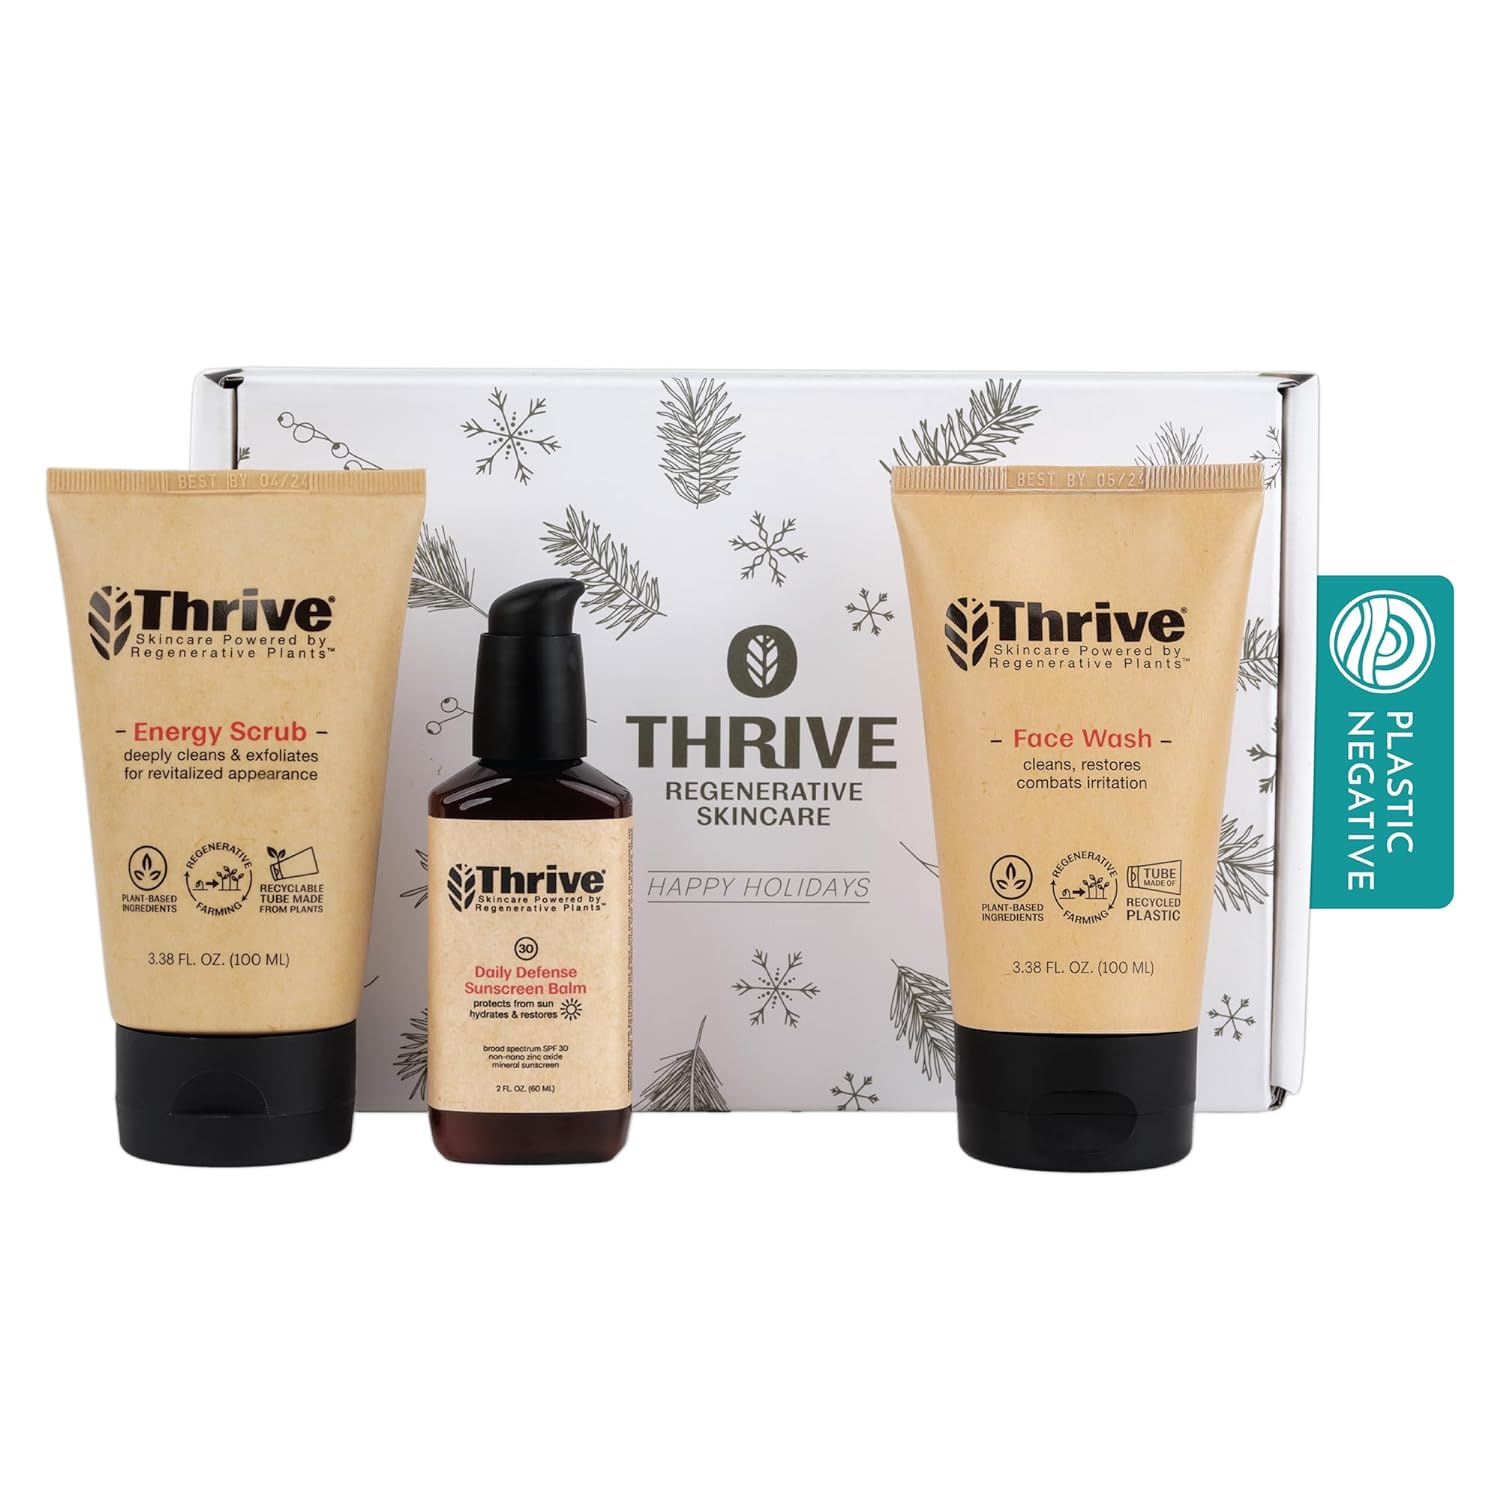 Thrive Natural Care Skin Care Set - Skincare Getaway Gift Set - Christmas Gift with Face Scrub, SPF30 and Face Wash - Vegan  Cruelty Free